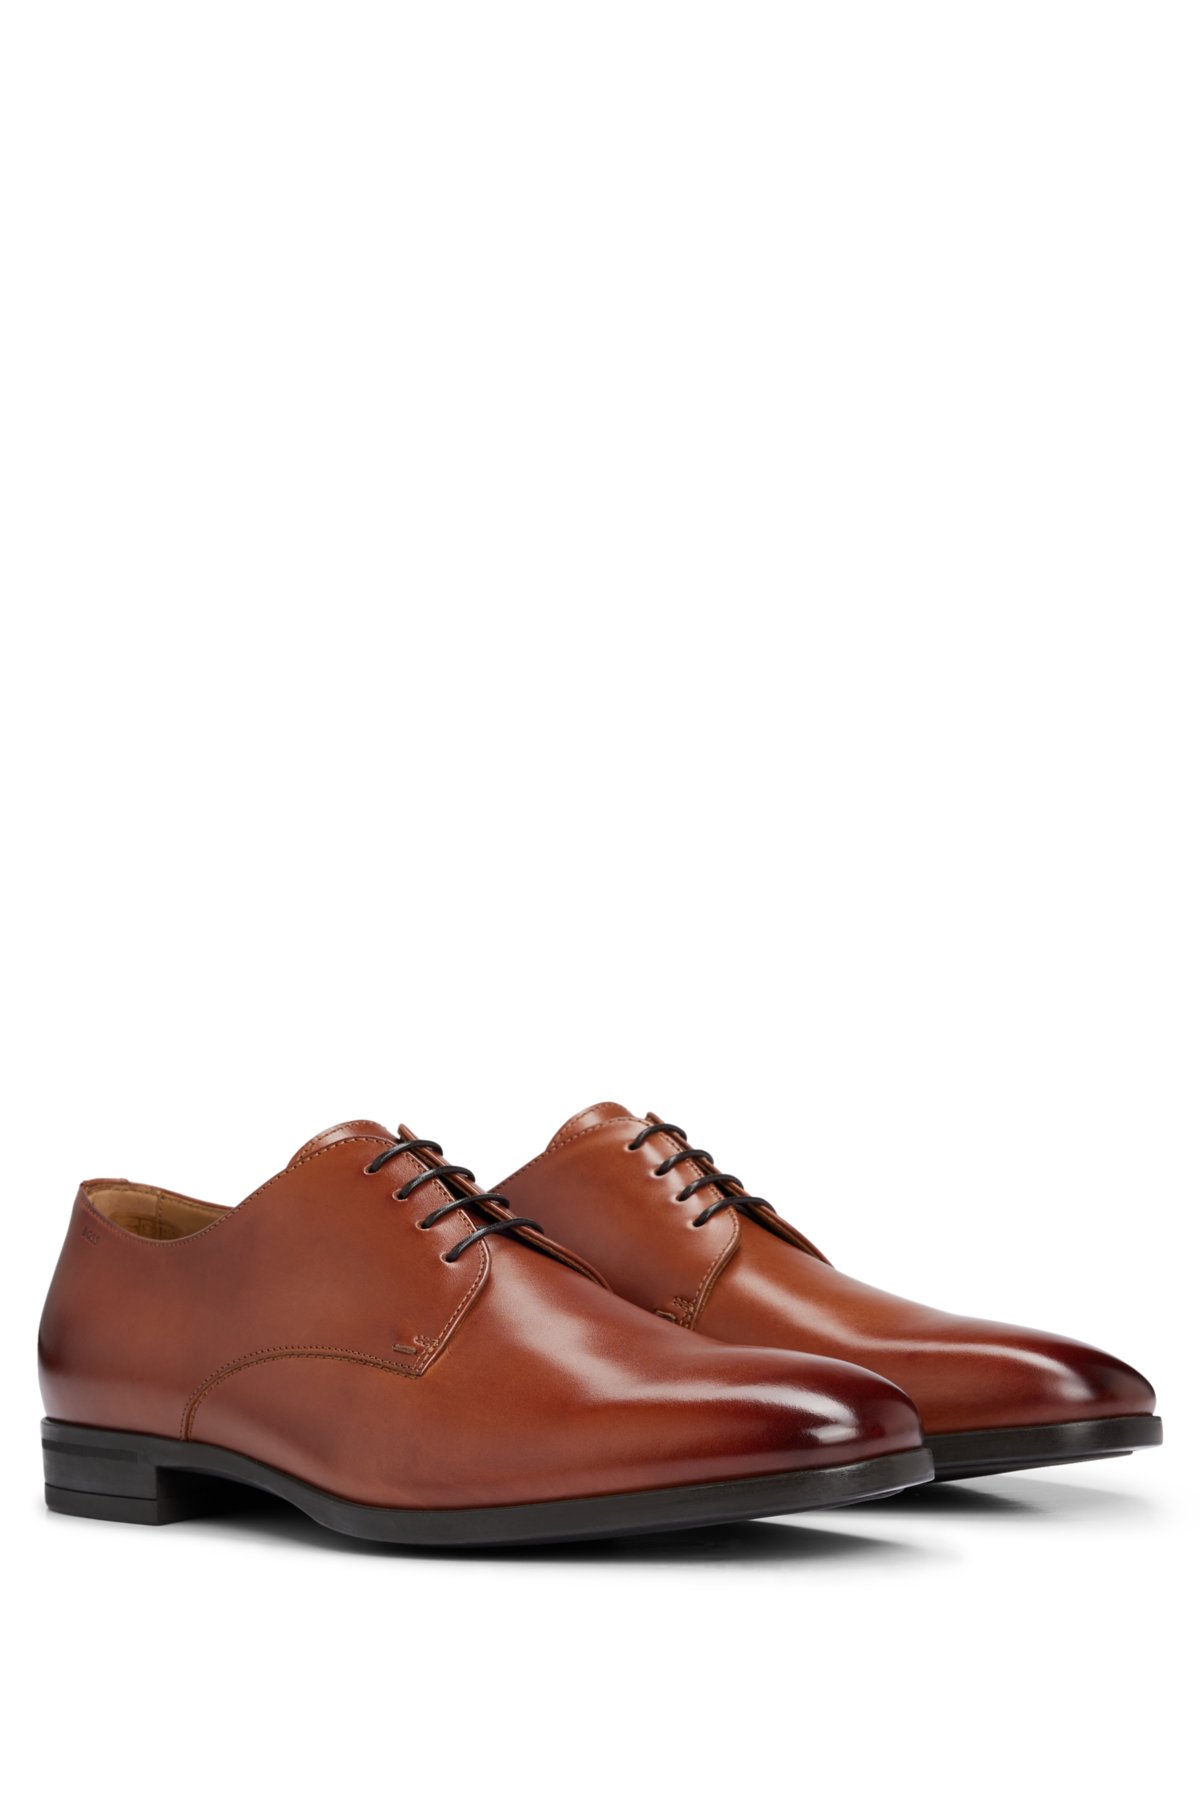 Leather Derby shoes with rubber sole